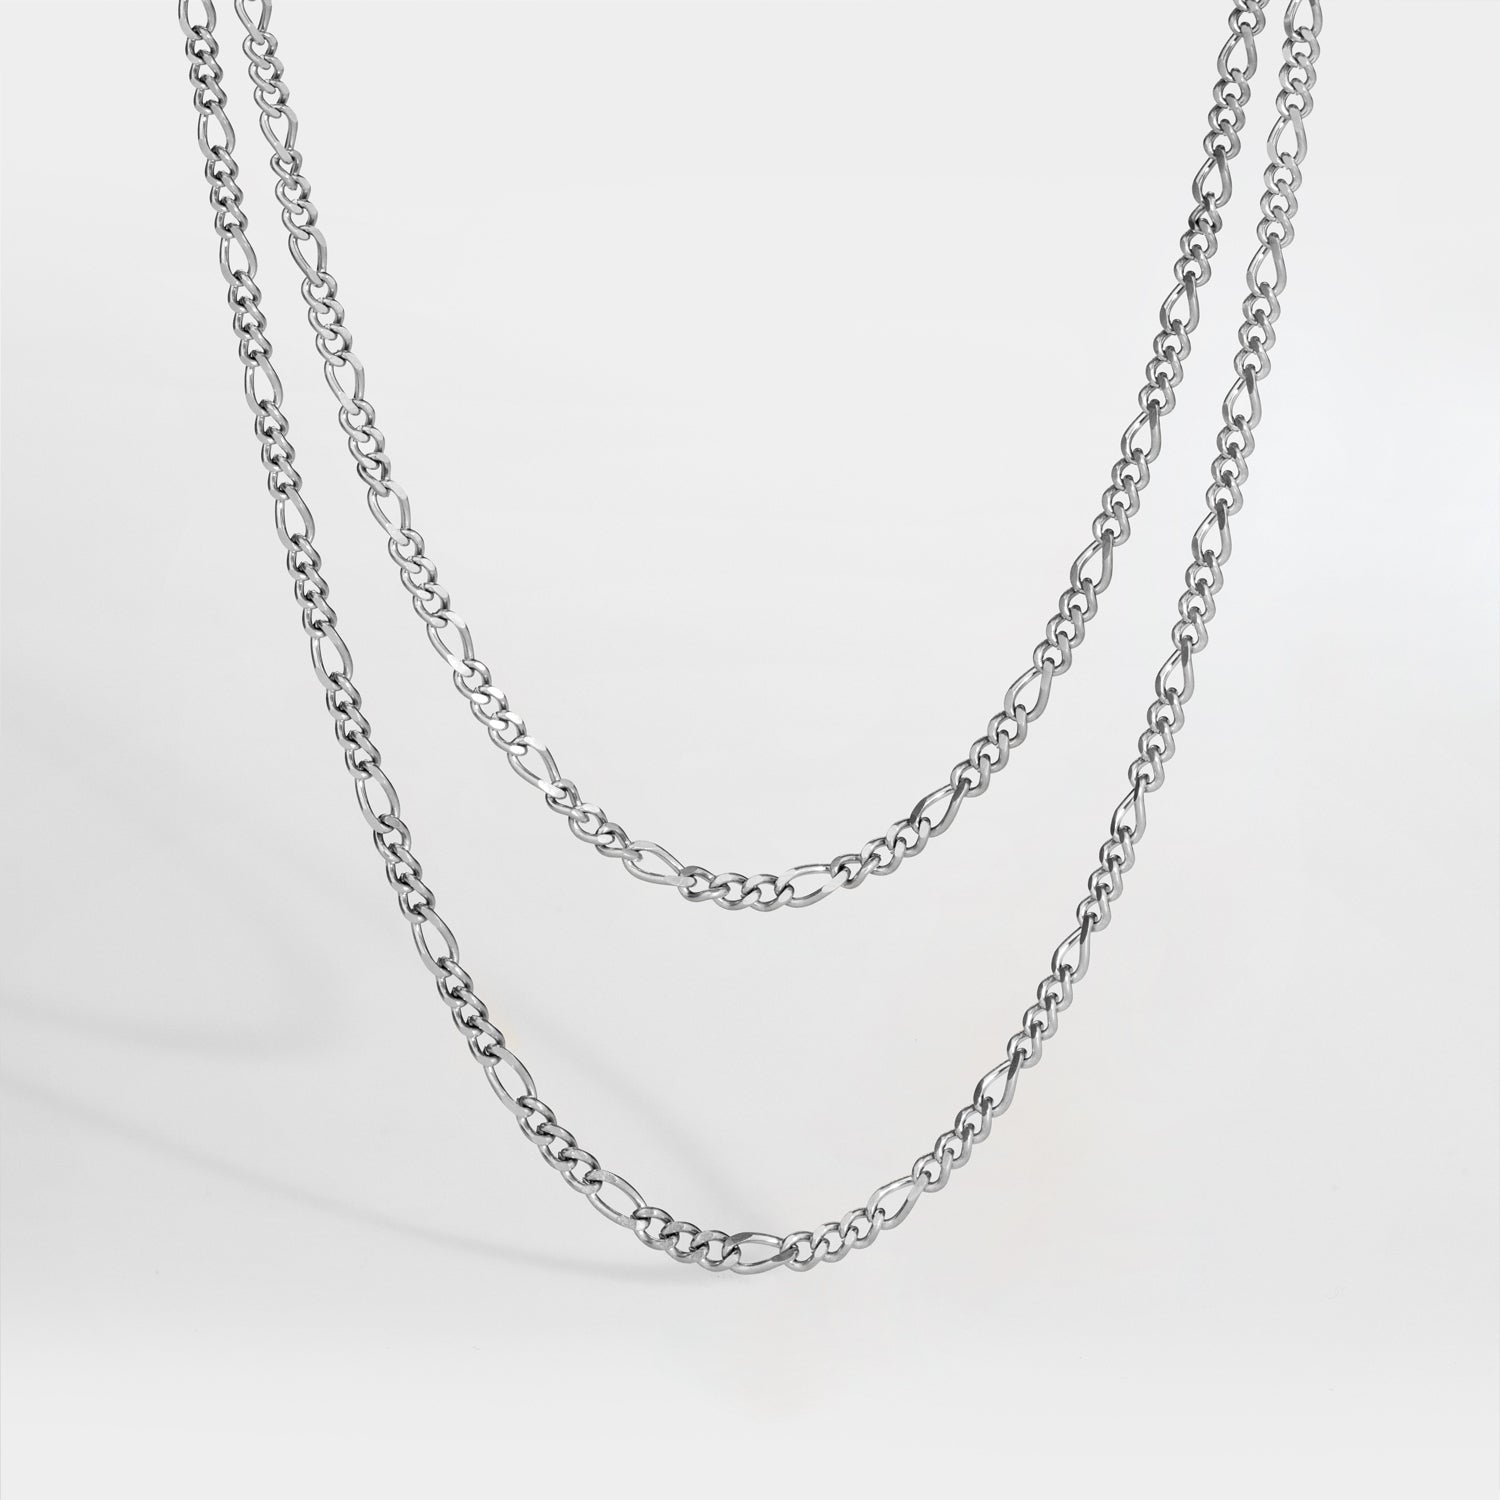 NL Double Antique chain - Silver-toned